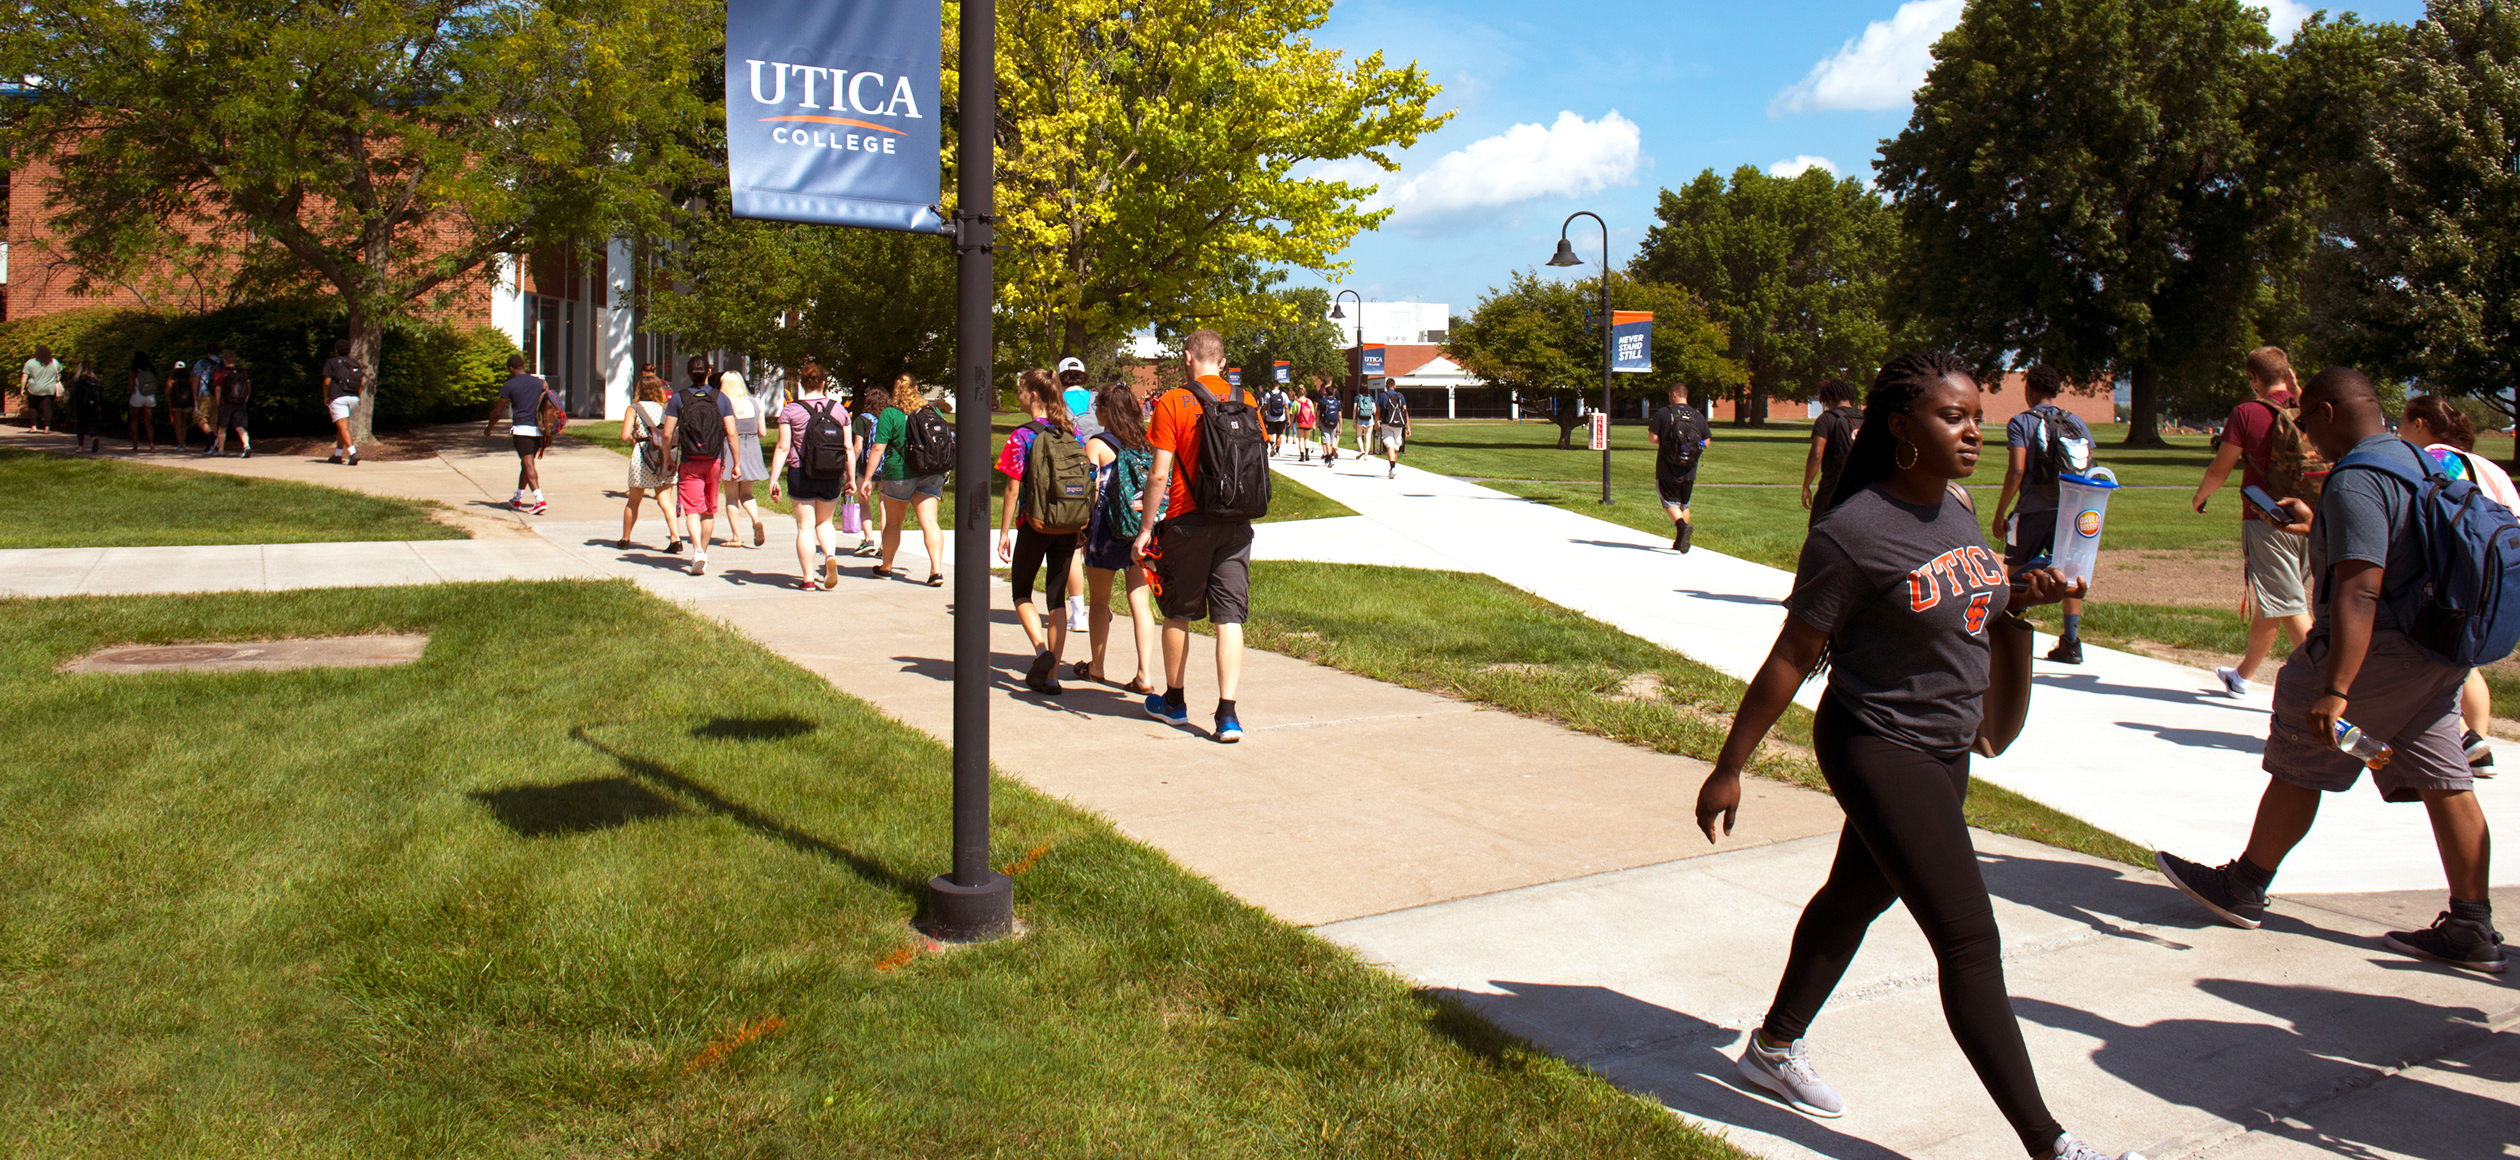 The Applied Ethics Institute at Utica University - Ethics & Public Policy Newsletter - January 2016